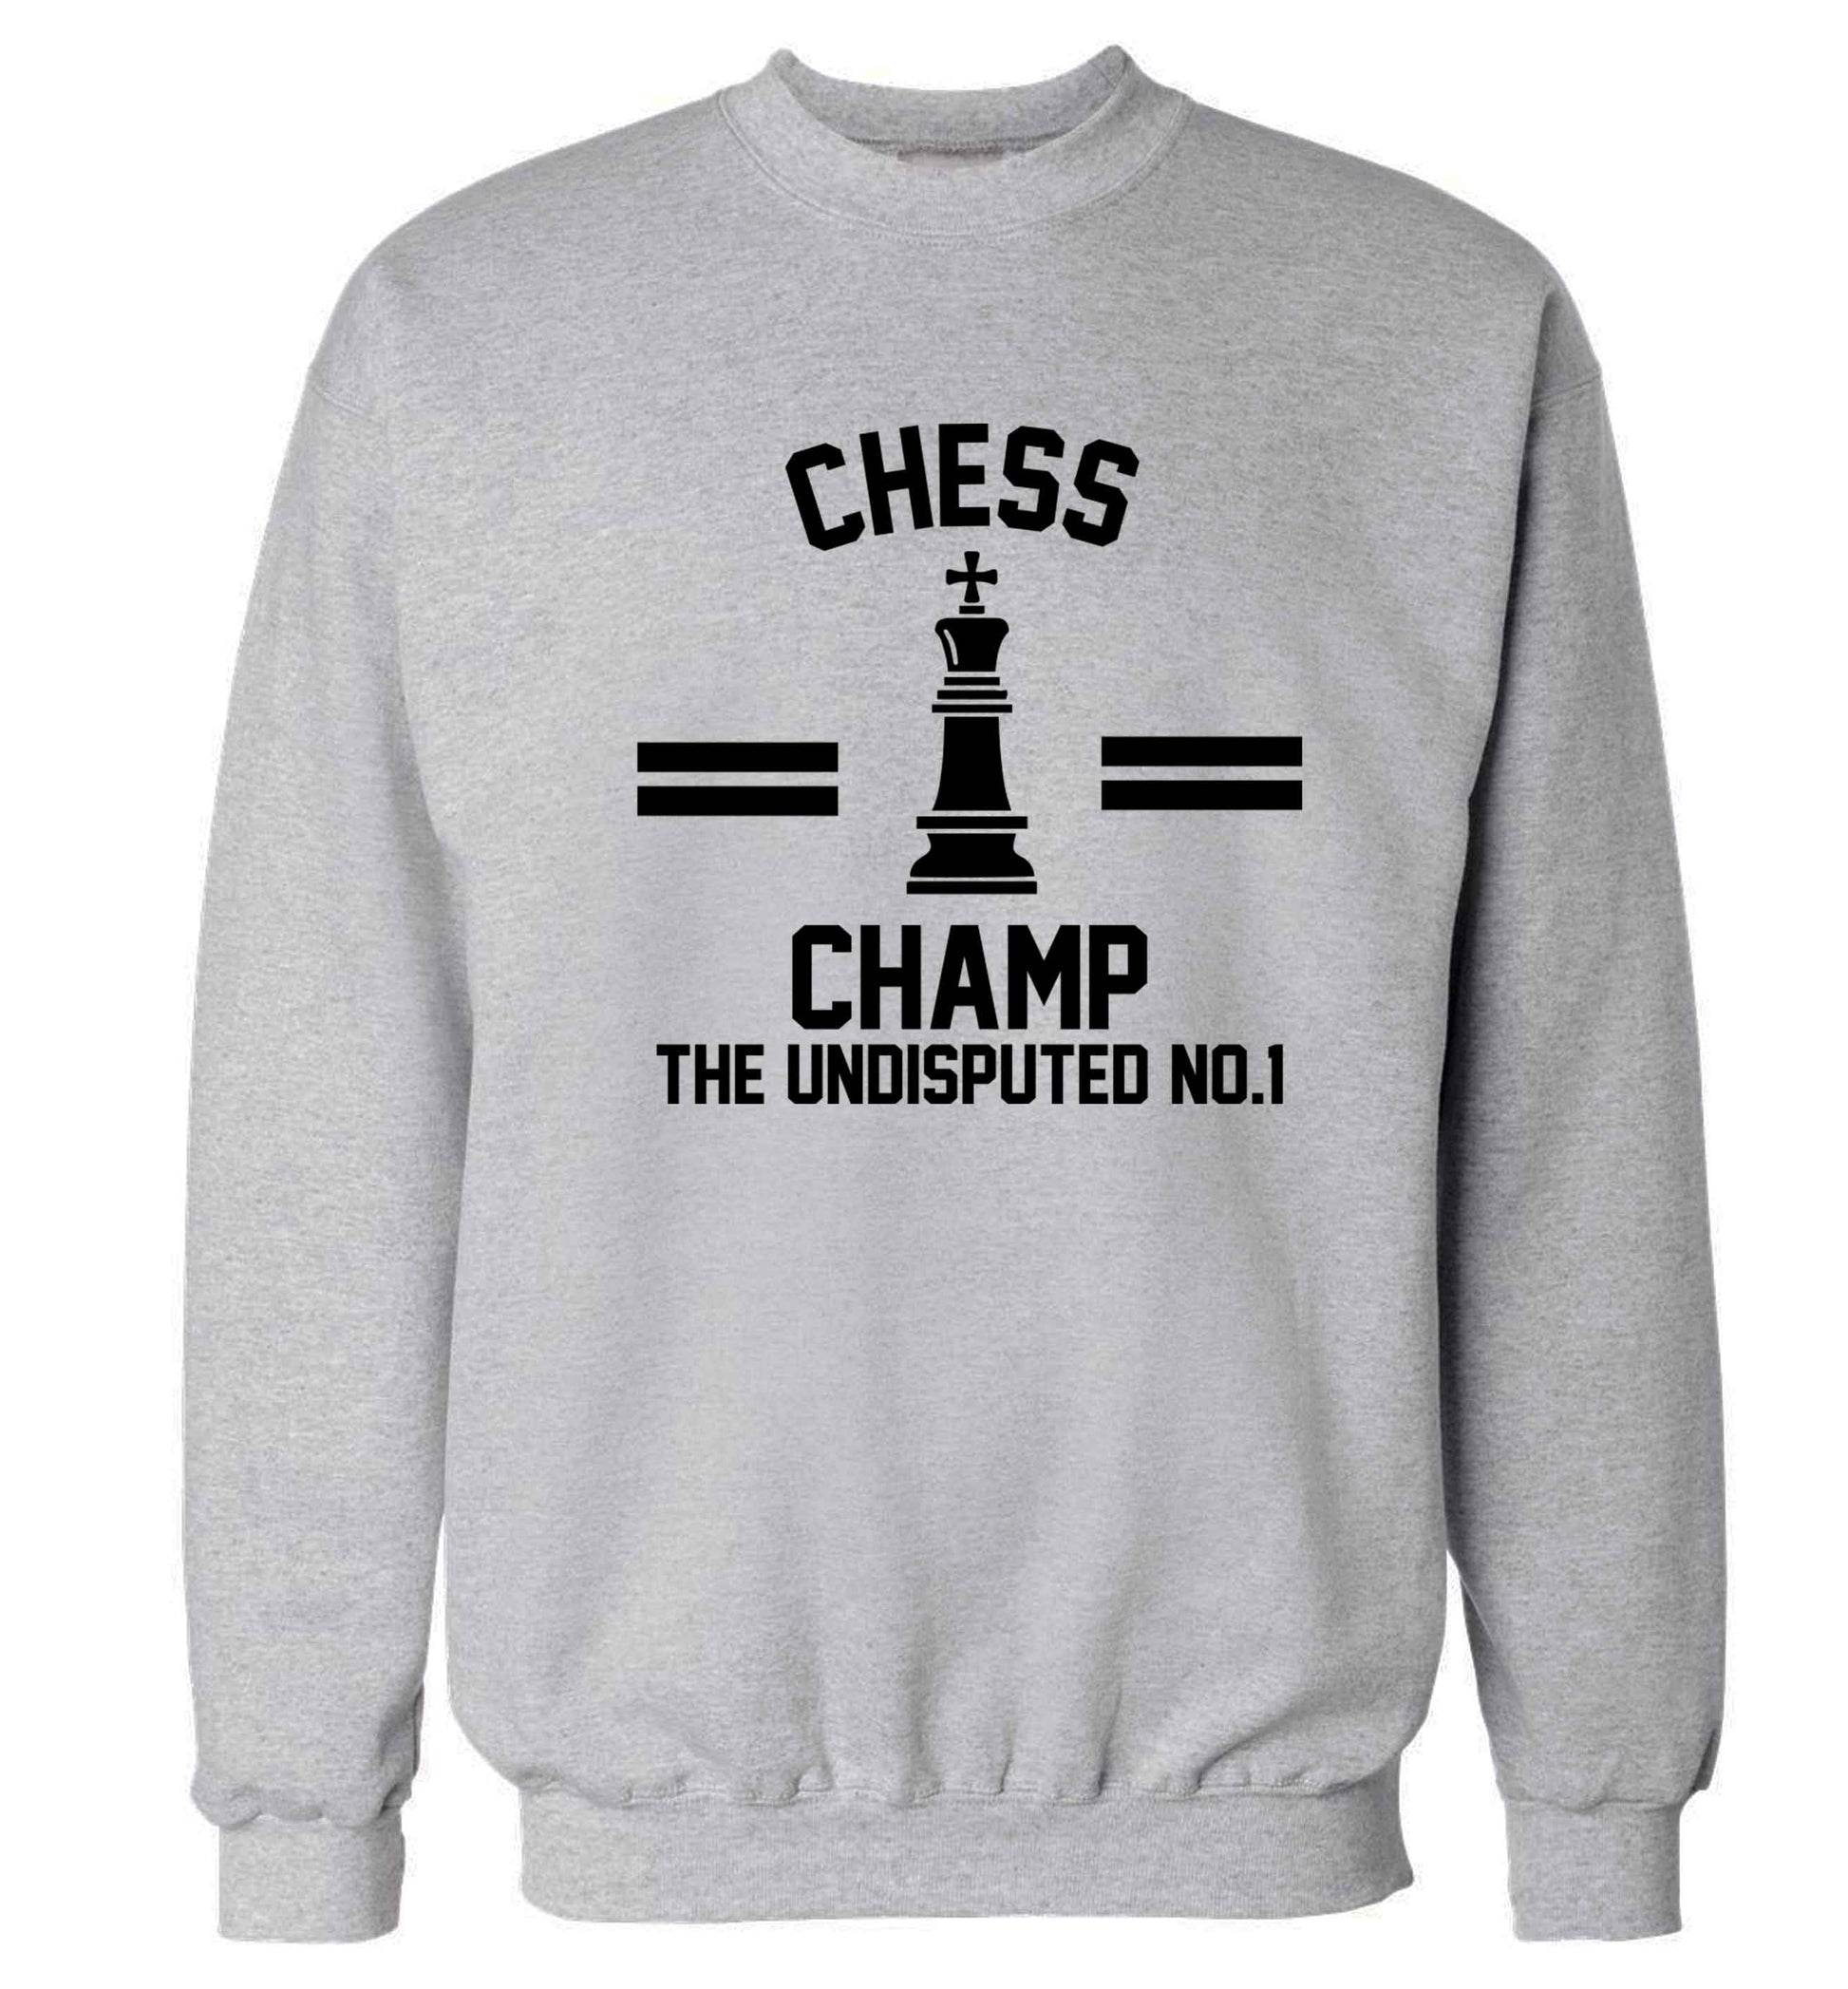 Undisputed chess championship no.1  Adult's unisex grey Sweater 2XL